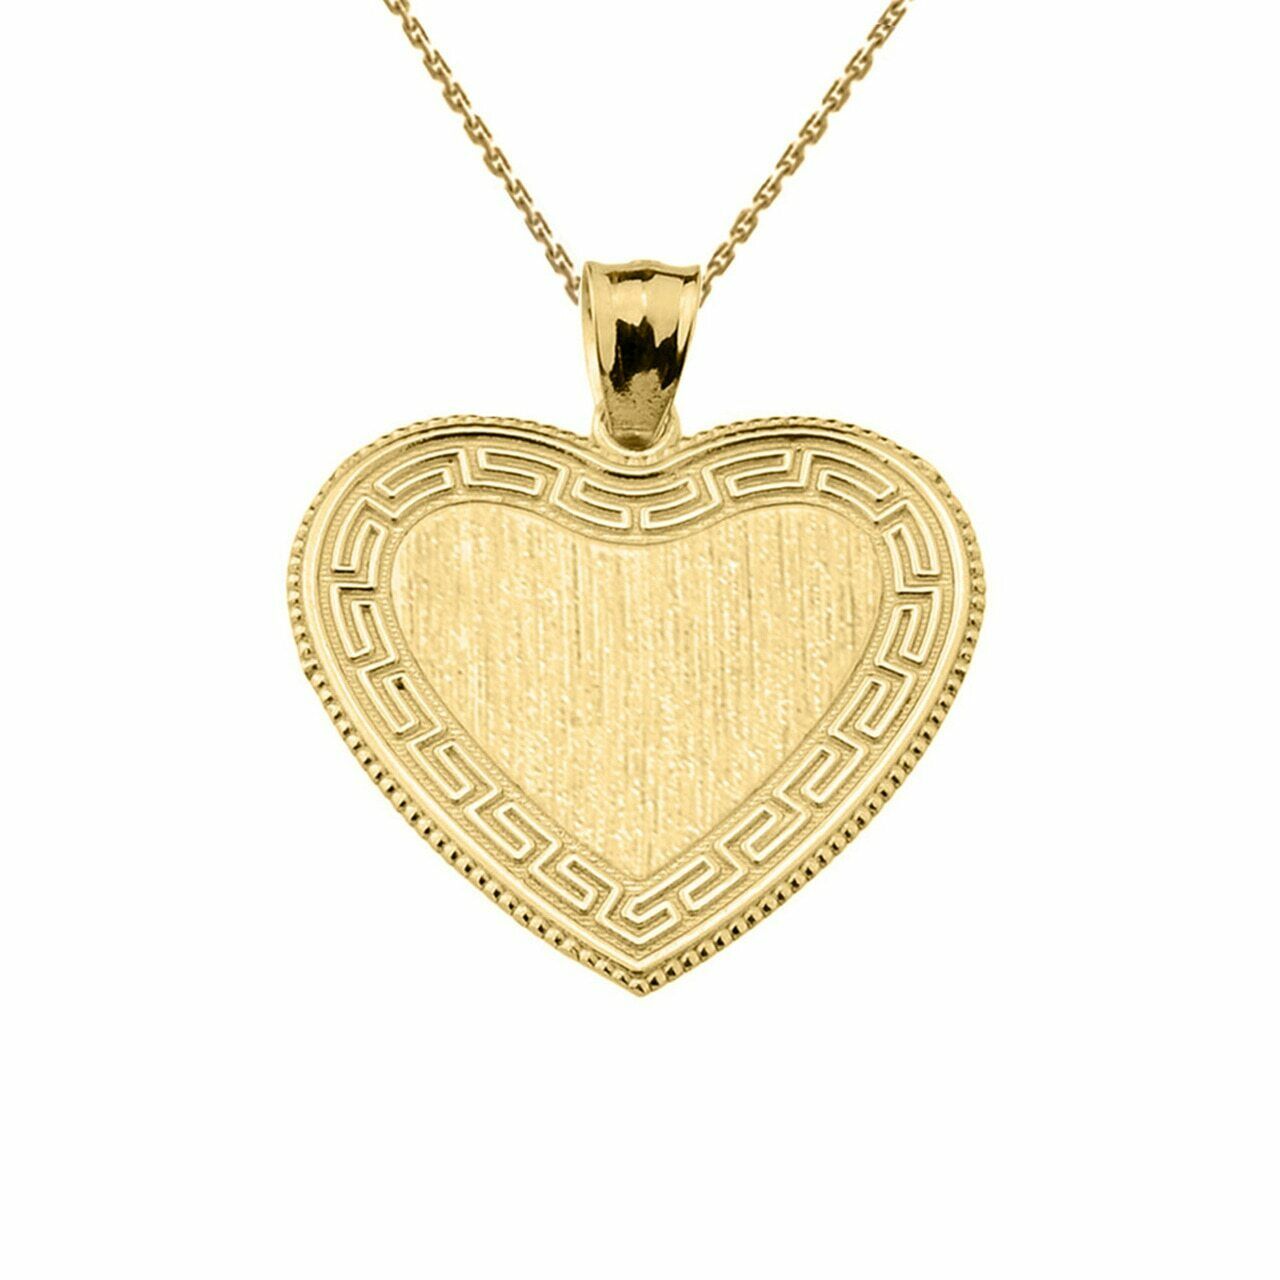 Solid 10k Yellow Gold Greek Key Engravable Heart Pendant Necklace